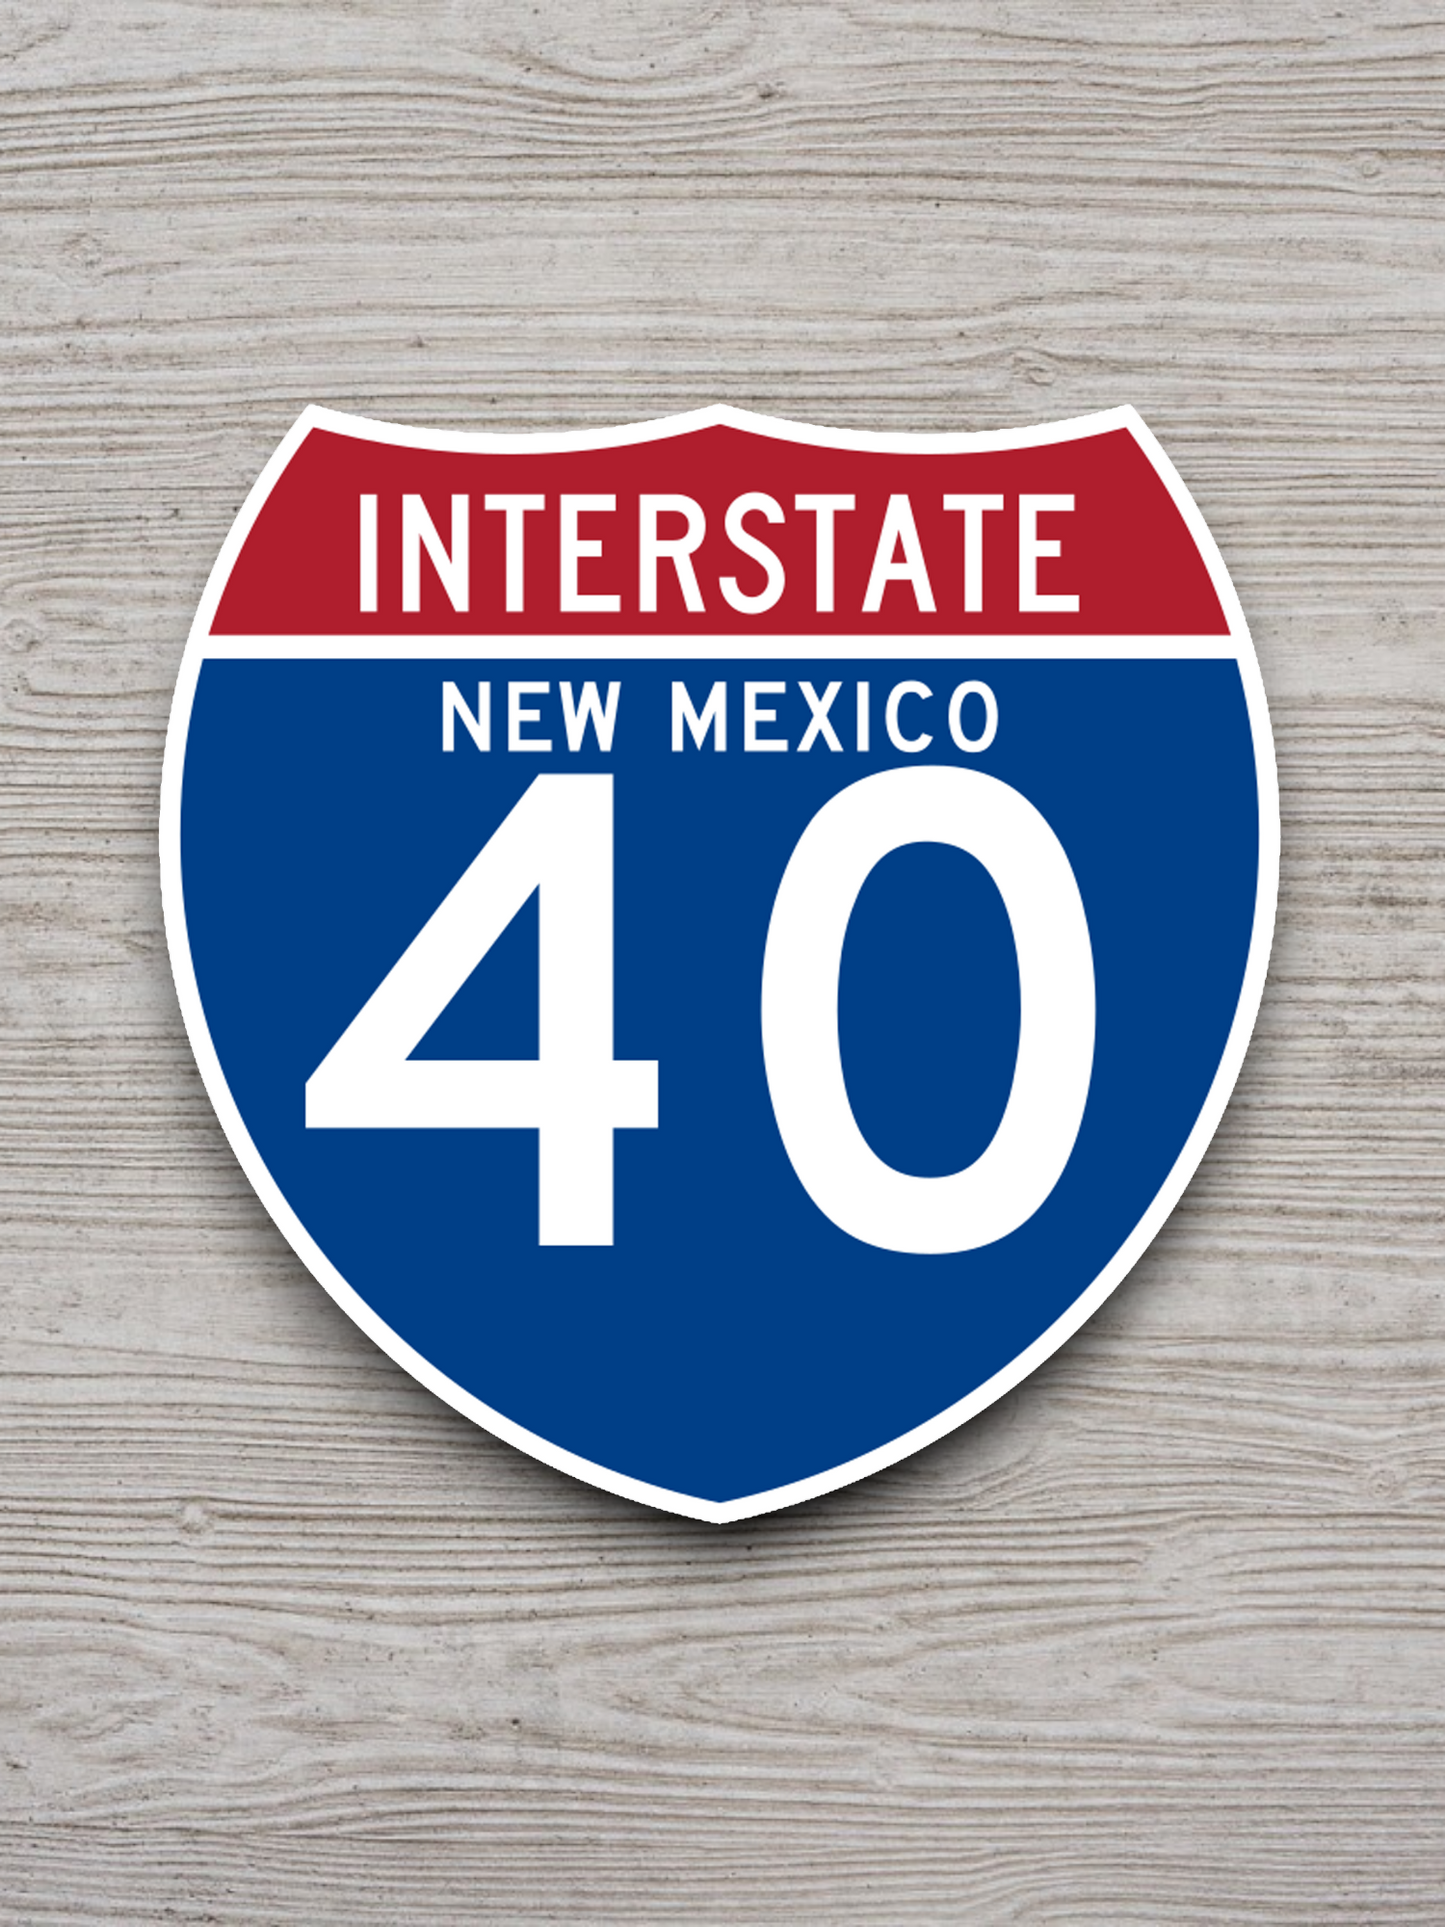 Interstate I-40 New Mexico - Road Sign Sticker